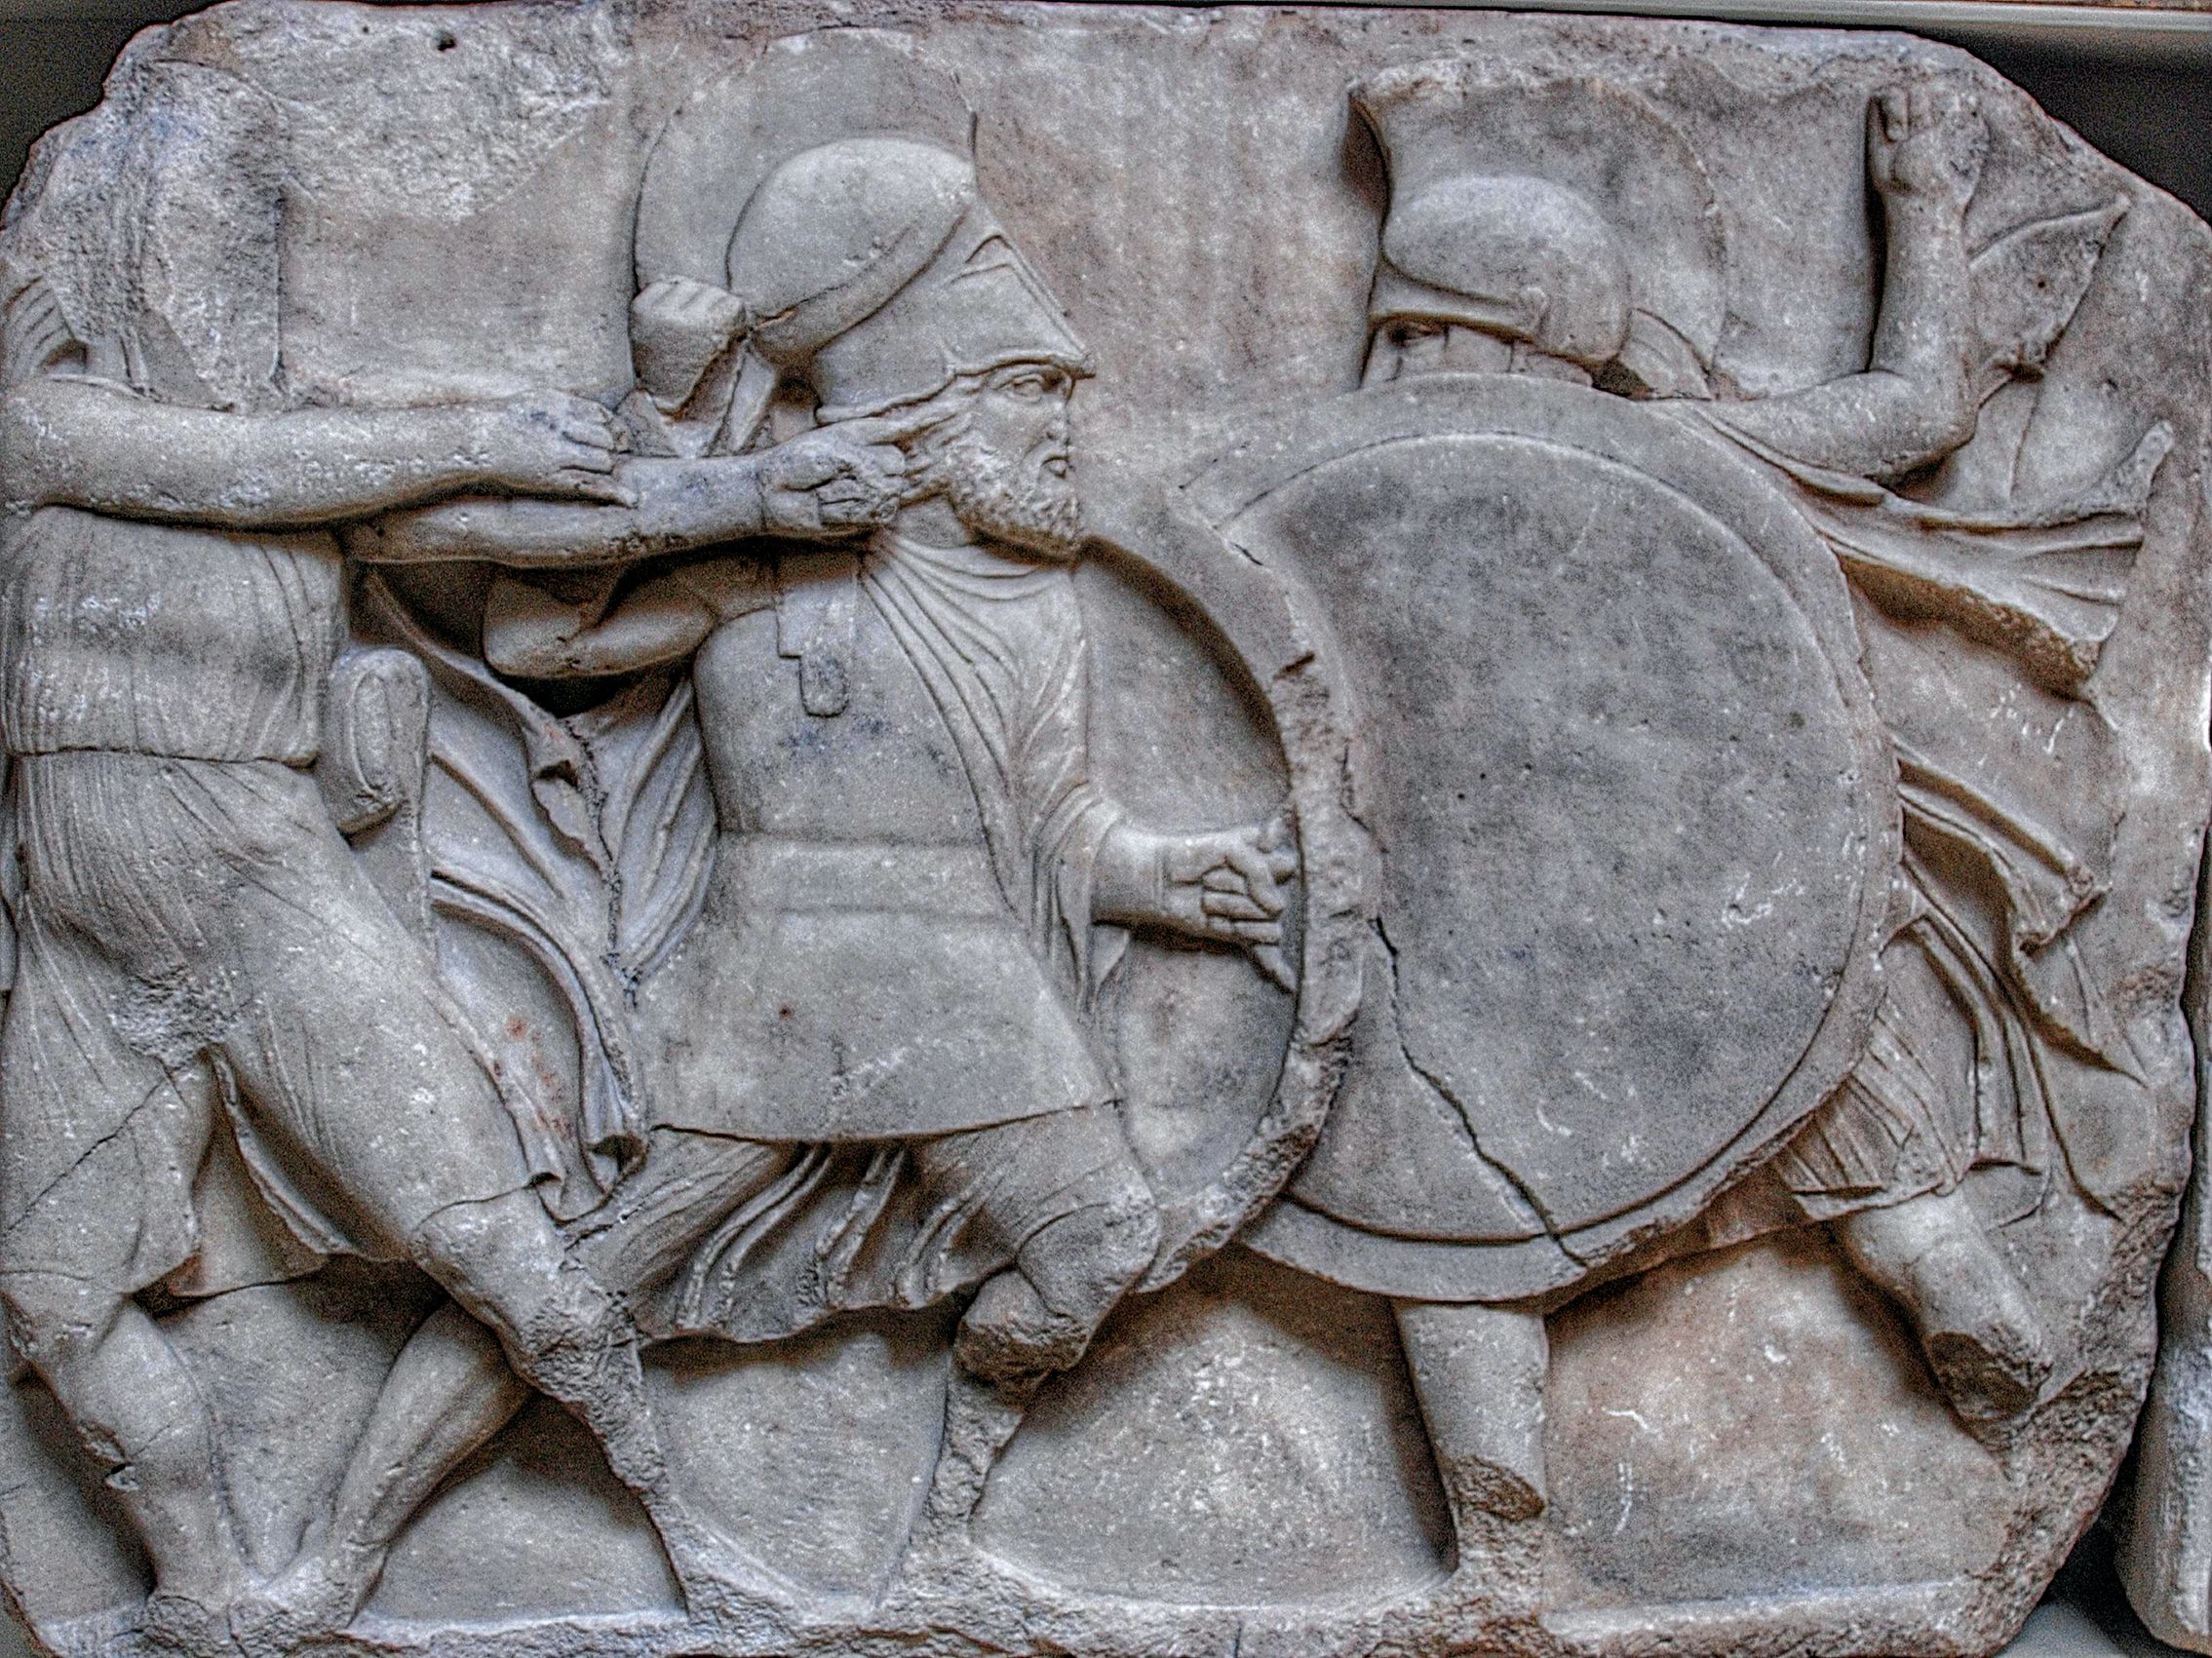 A frieze depicting Greek hoplites in battle, from the Nereid Monument at Xanthos in Lycia, ca. 390-380 BCE, on display at London’s British Museum.